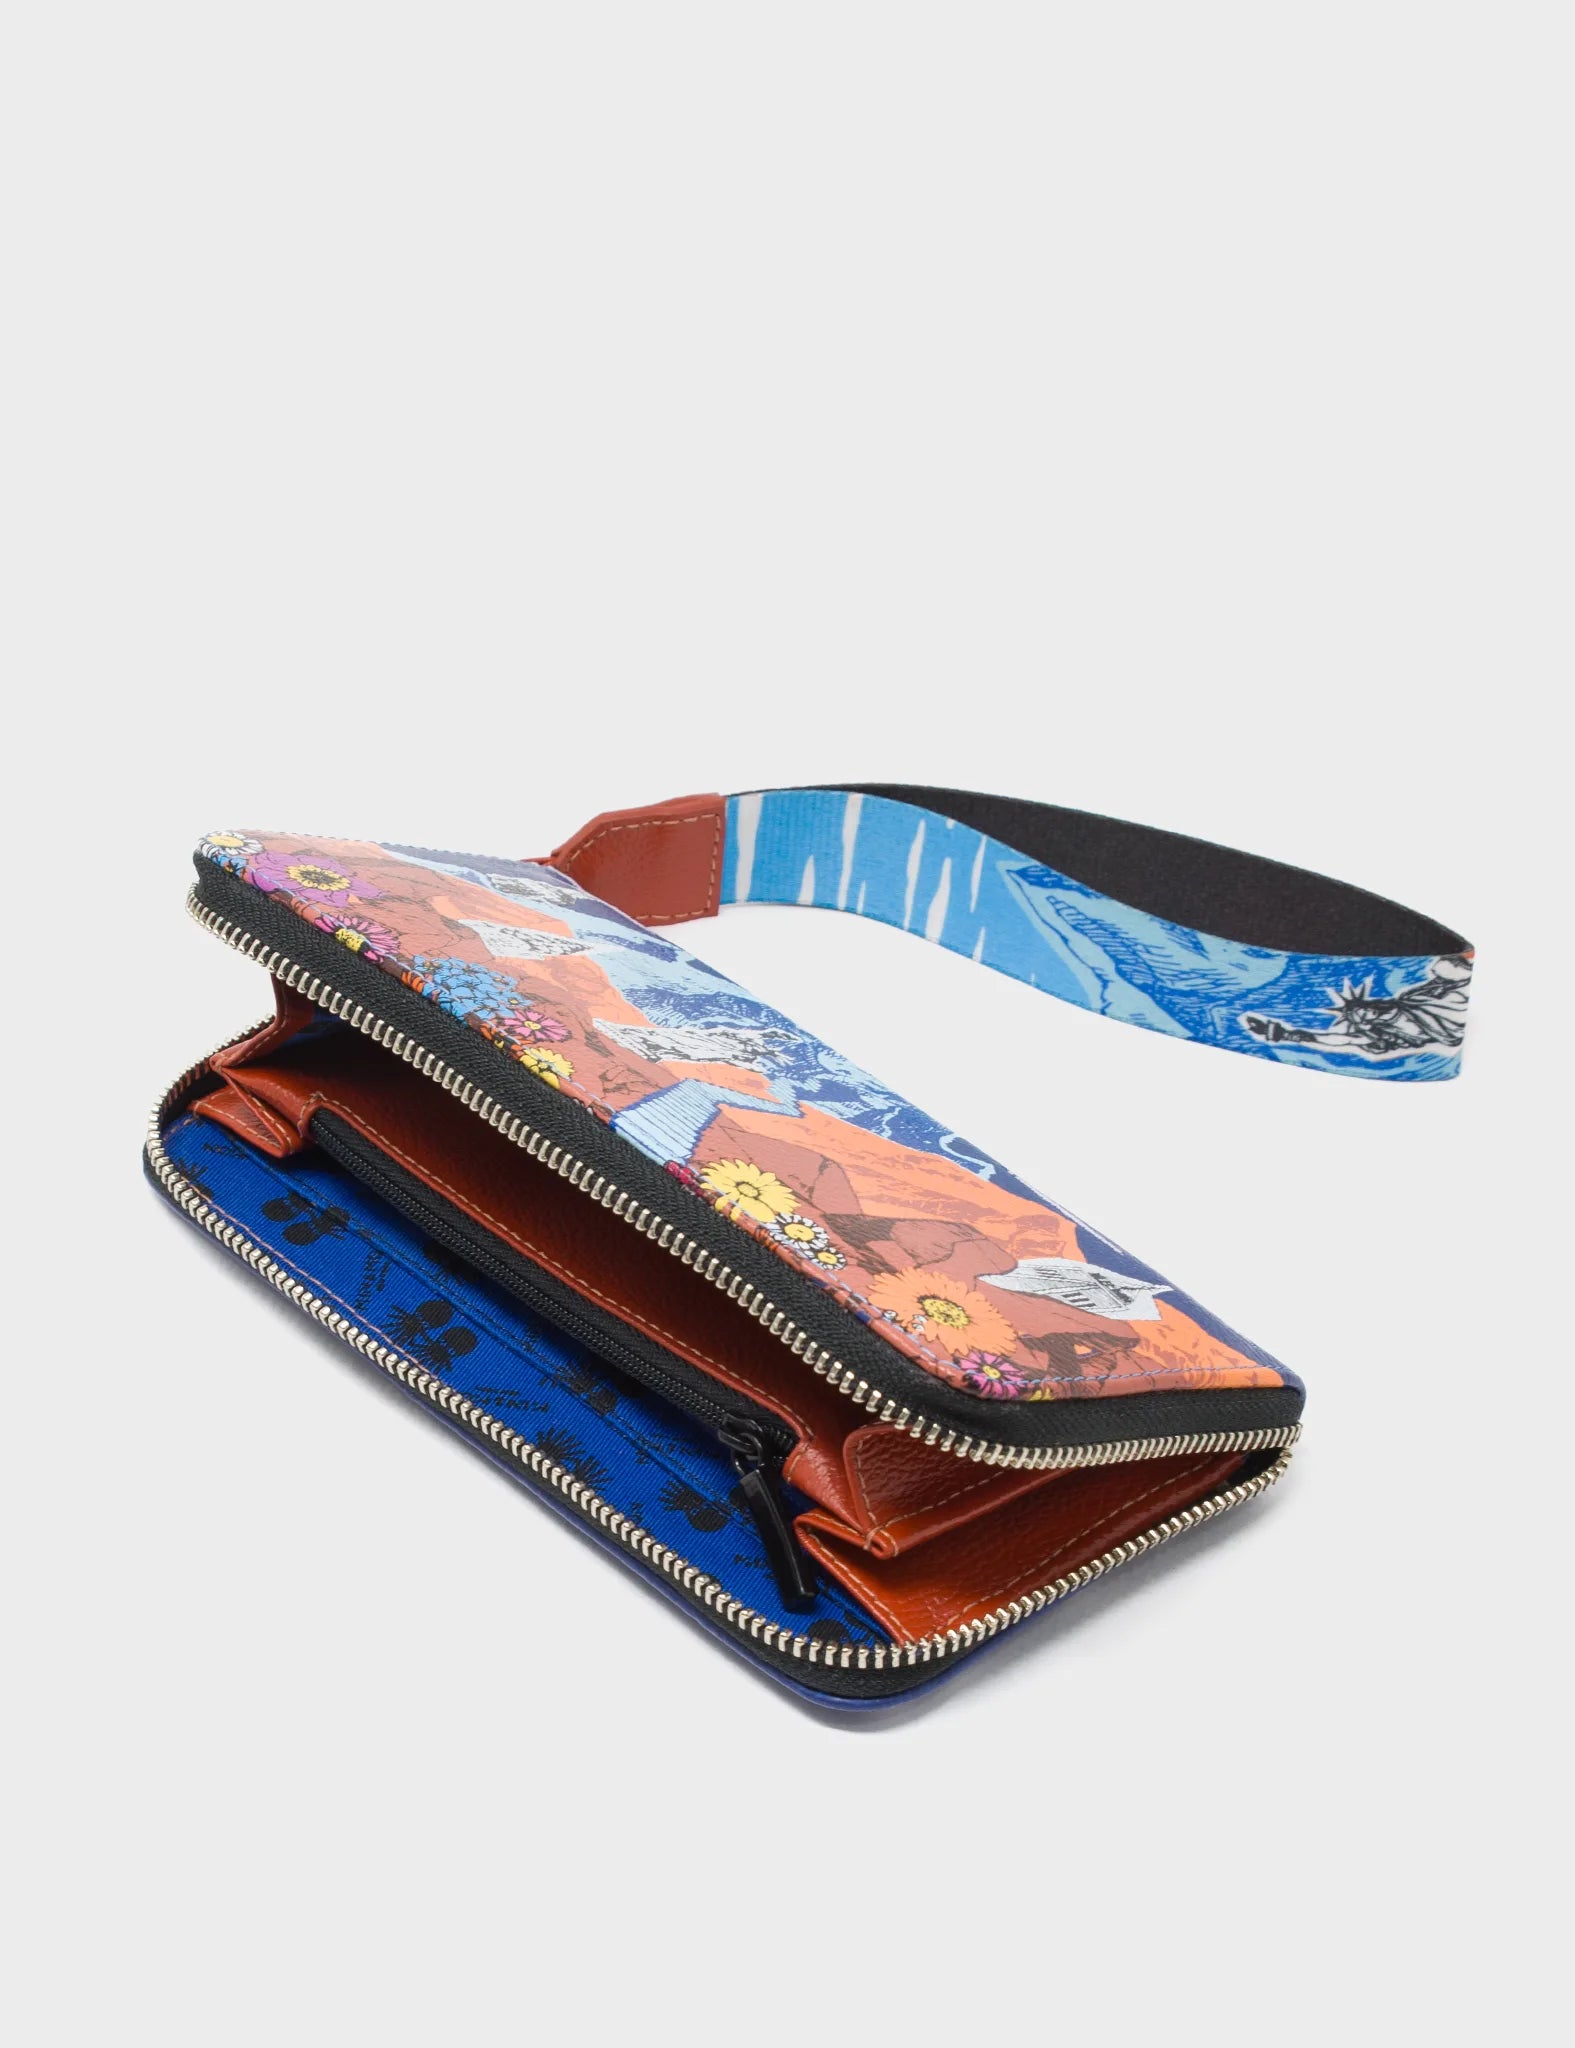 Francis Royal Blue Leather Wallet - Desert, Mountains and Flowers Design - Opened